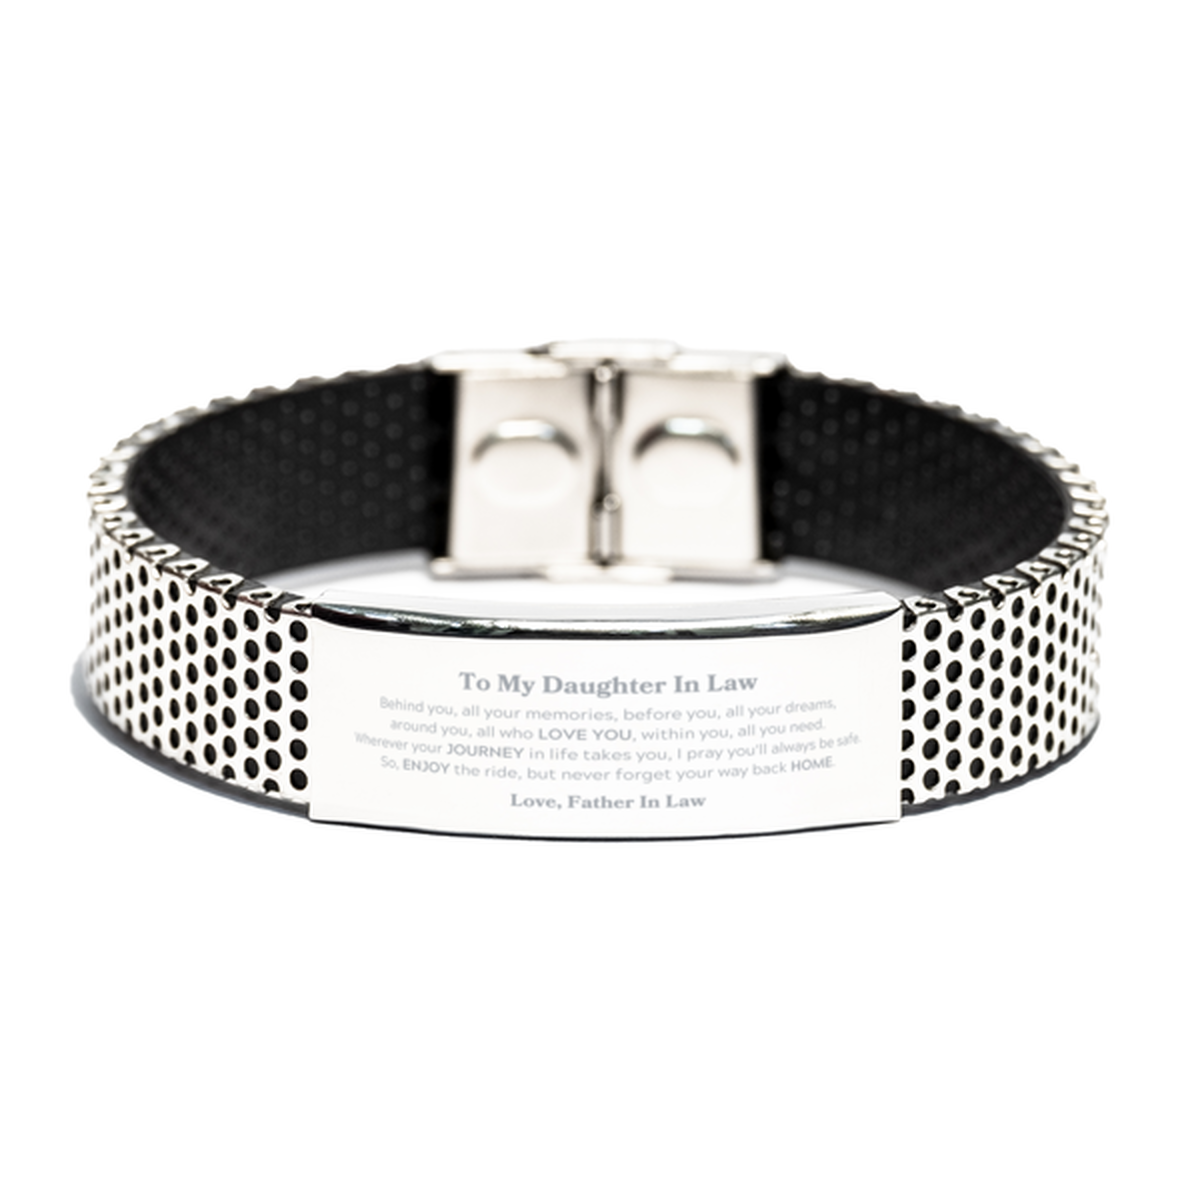 To My Daughter In Law Graduation Gifts from Father In Law, Daughter In Law Stainless Steel Bracelet Christmas Birthday Gifts for Daughter In Law Behind you, all your memories, before you, all your dreams. Love, Father In Law